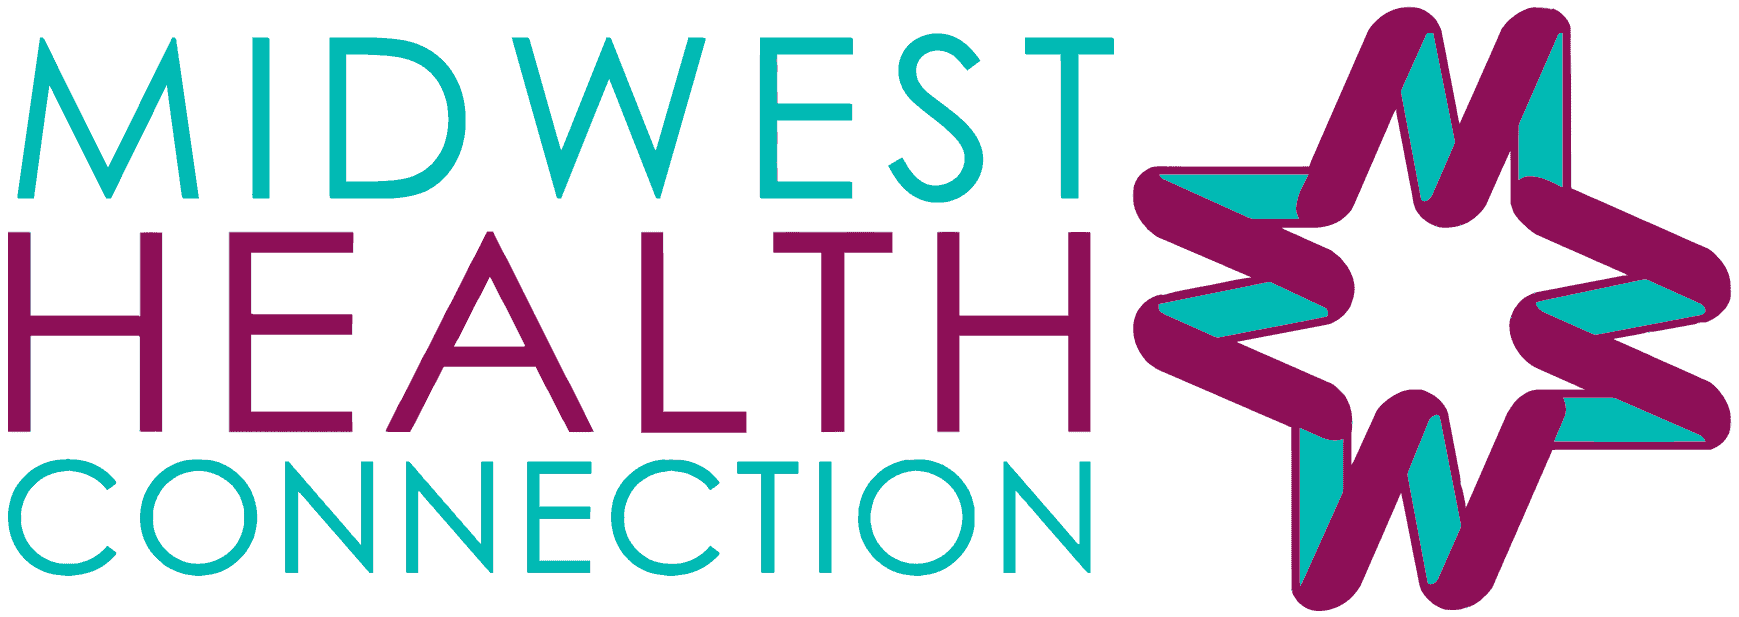 Midwest Health Connection Logo